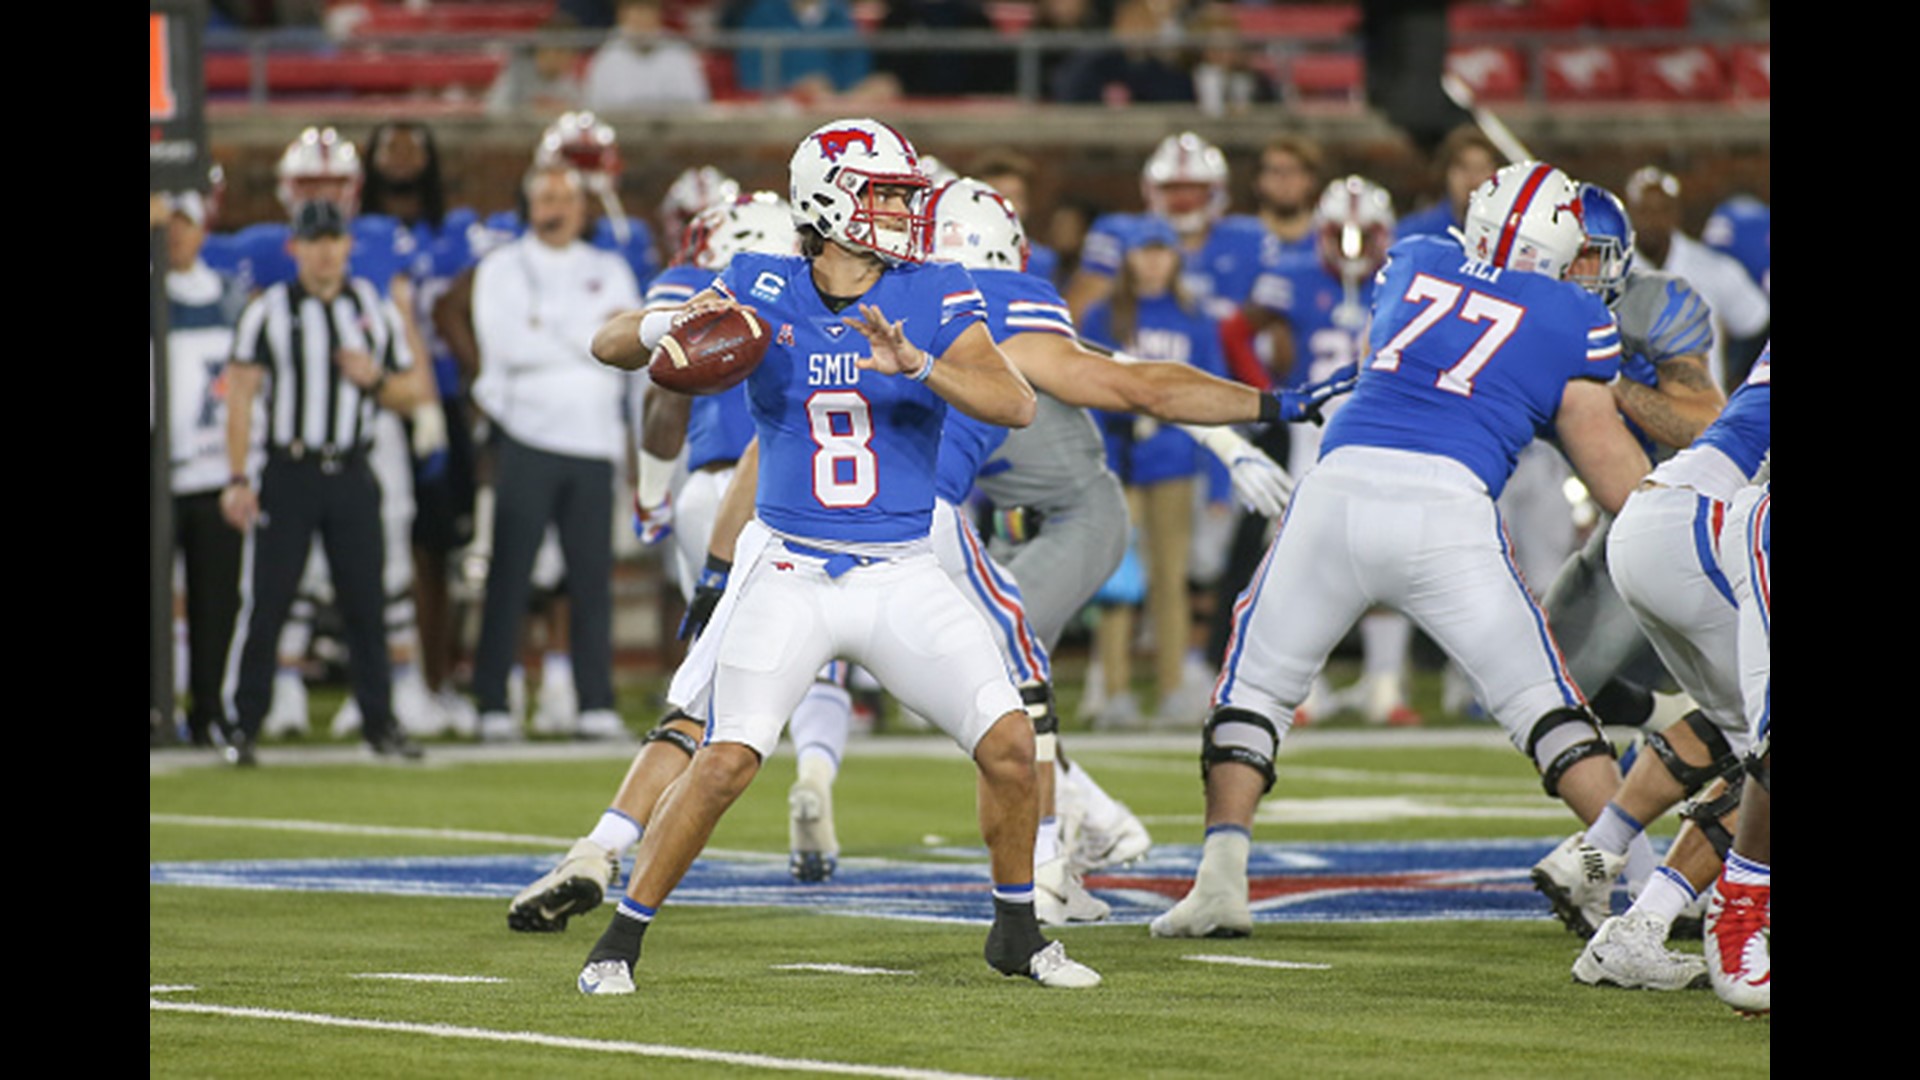 The former SMU quarterback threw for over 9,000 yards and 71 touchdowns in three seasons with the Mustangs